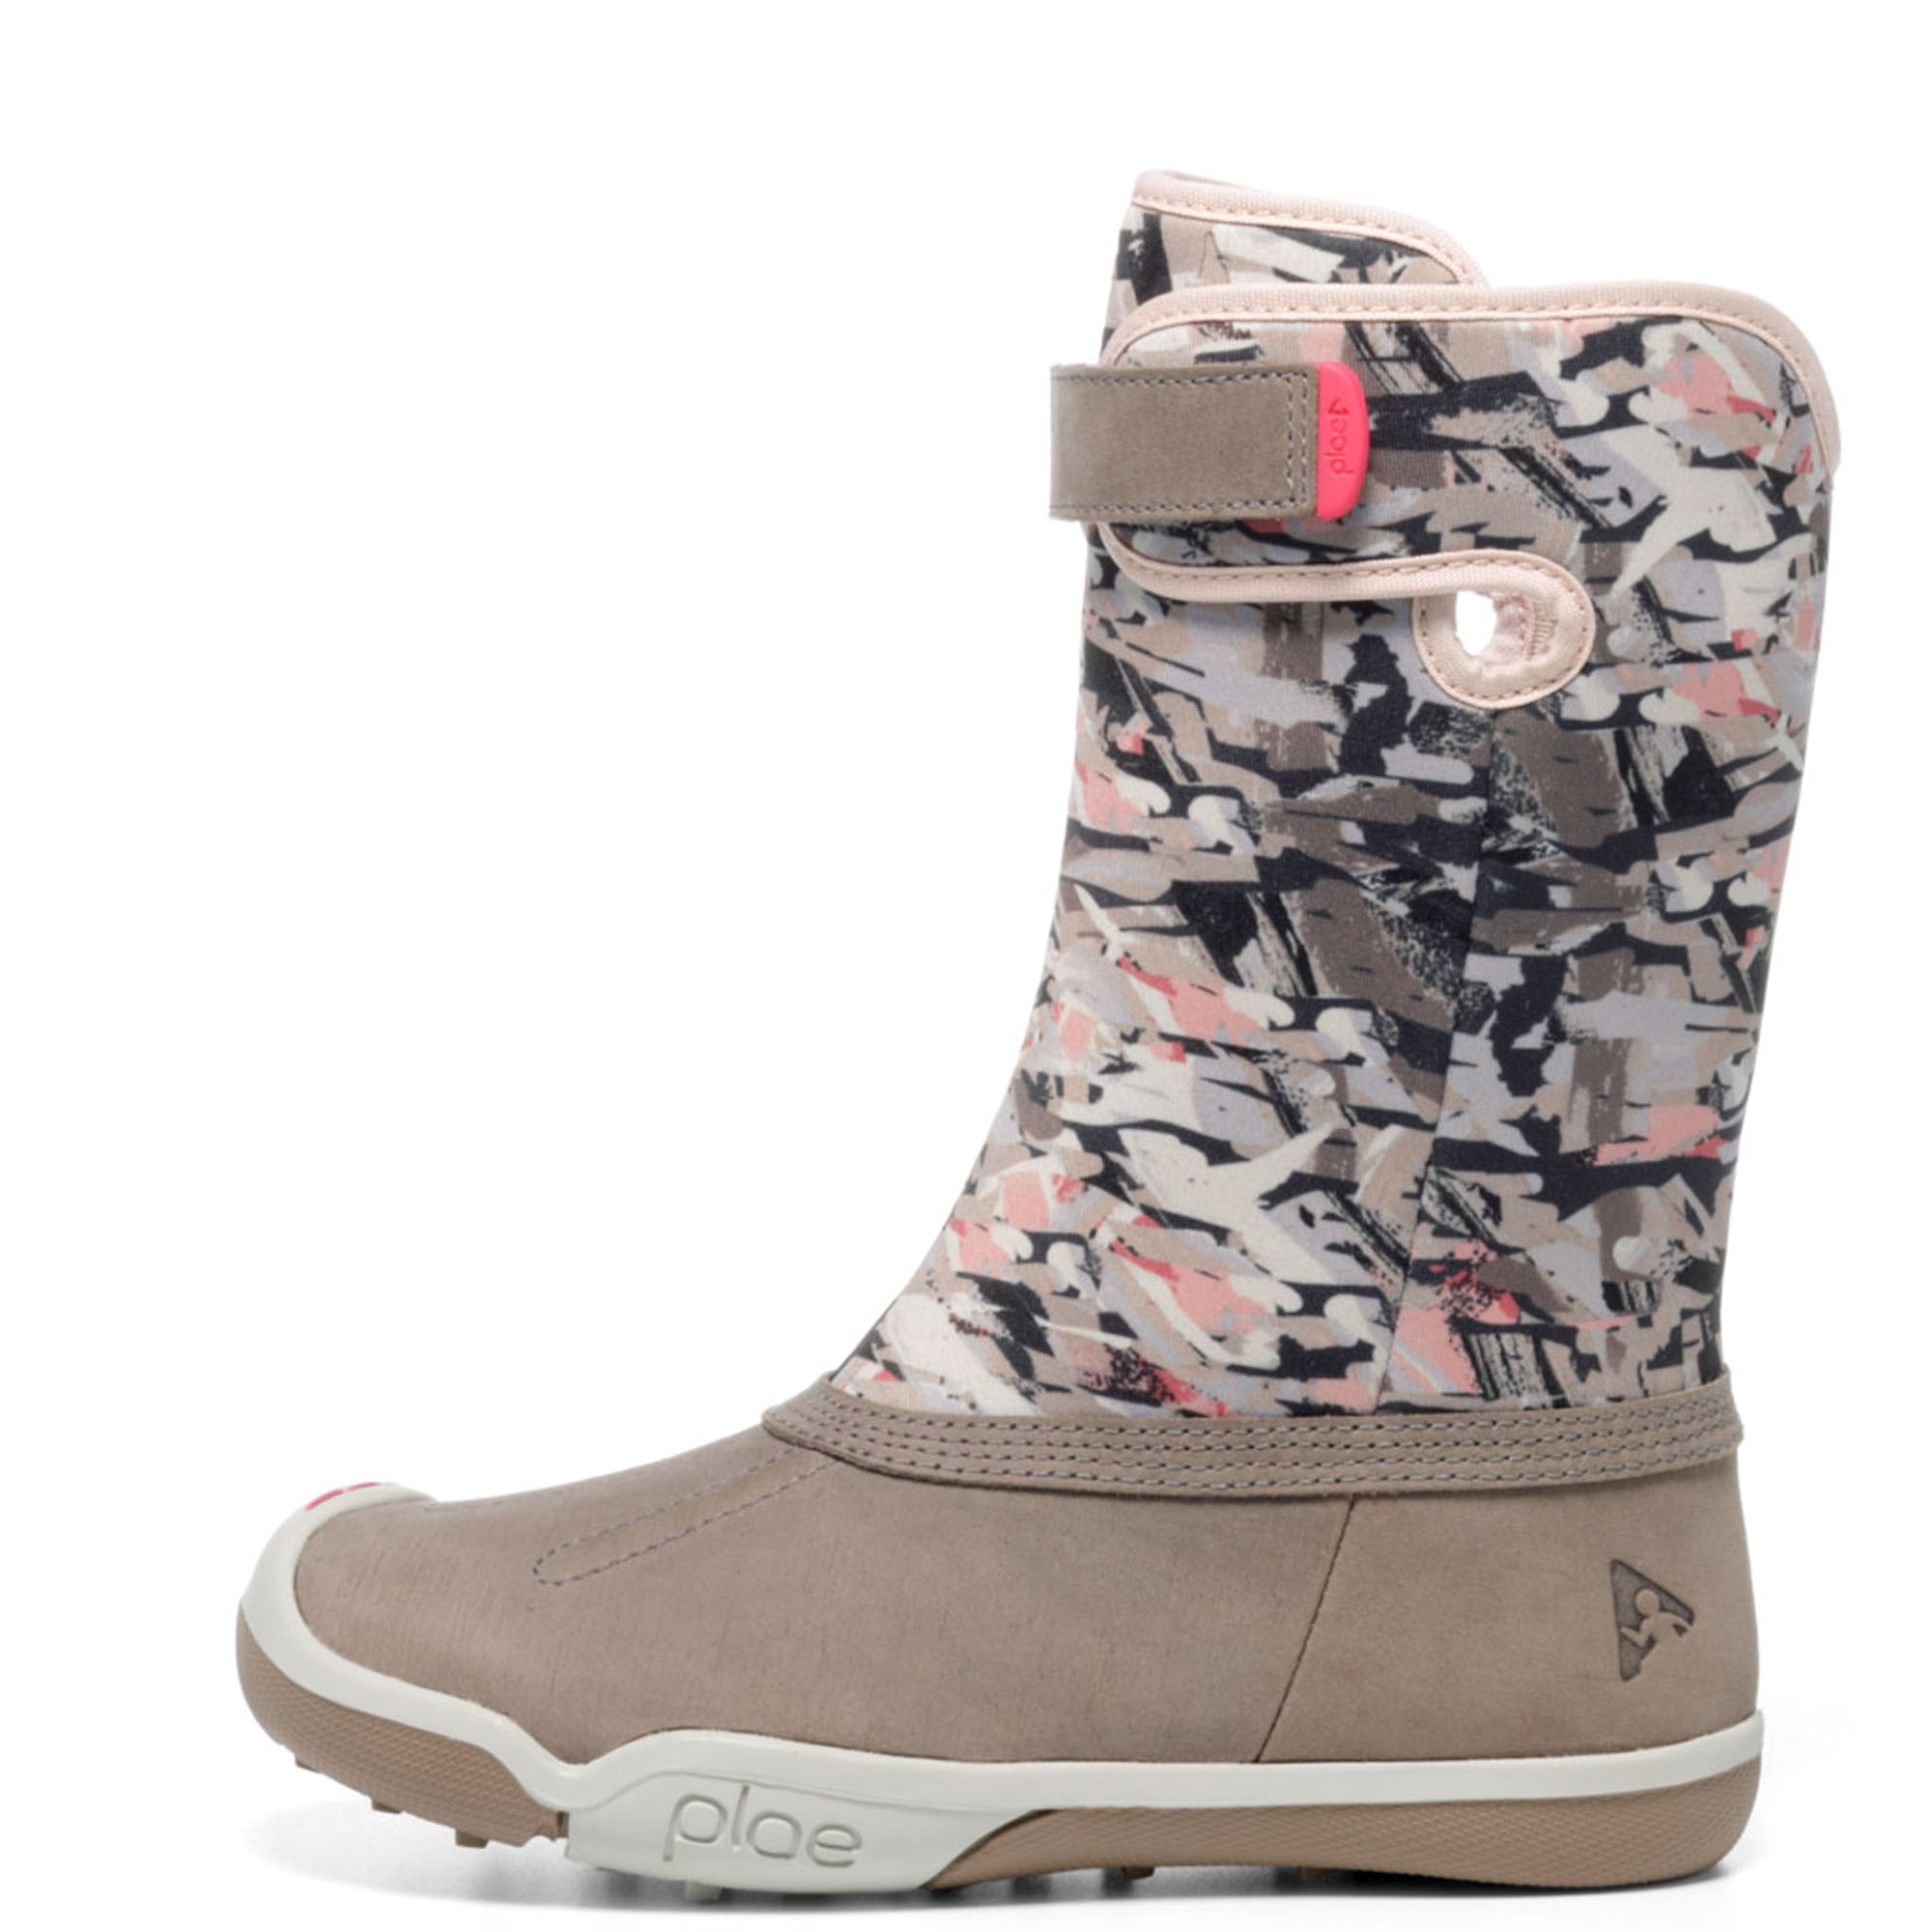 plae snow boots